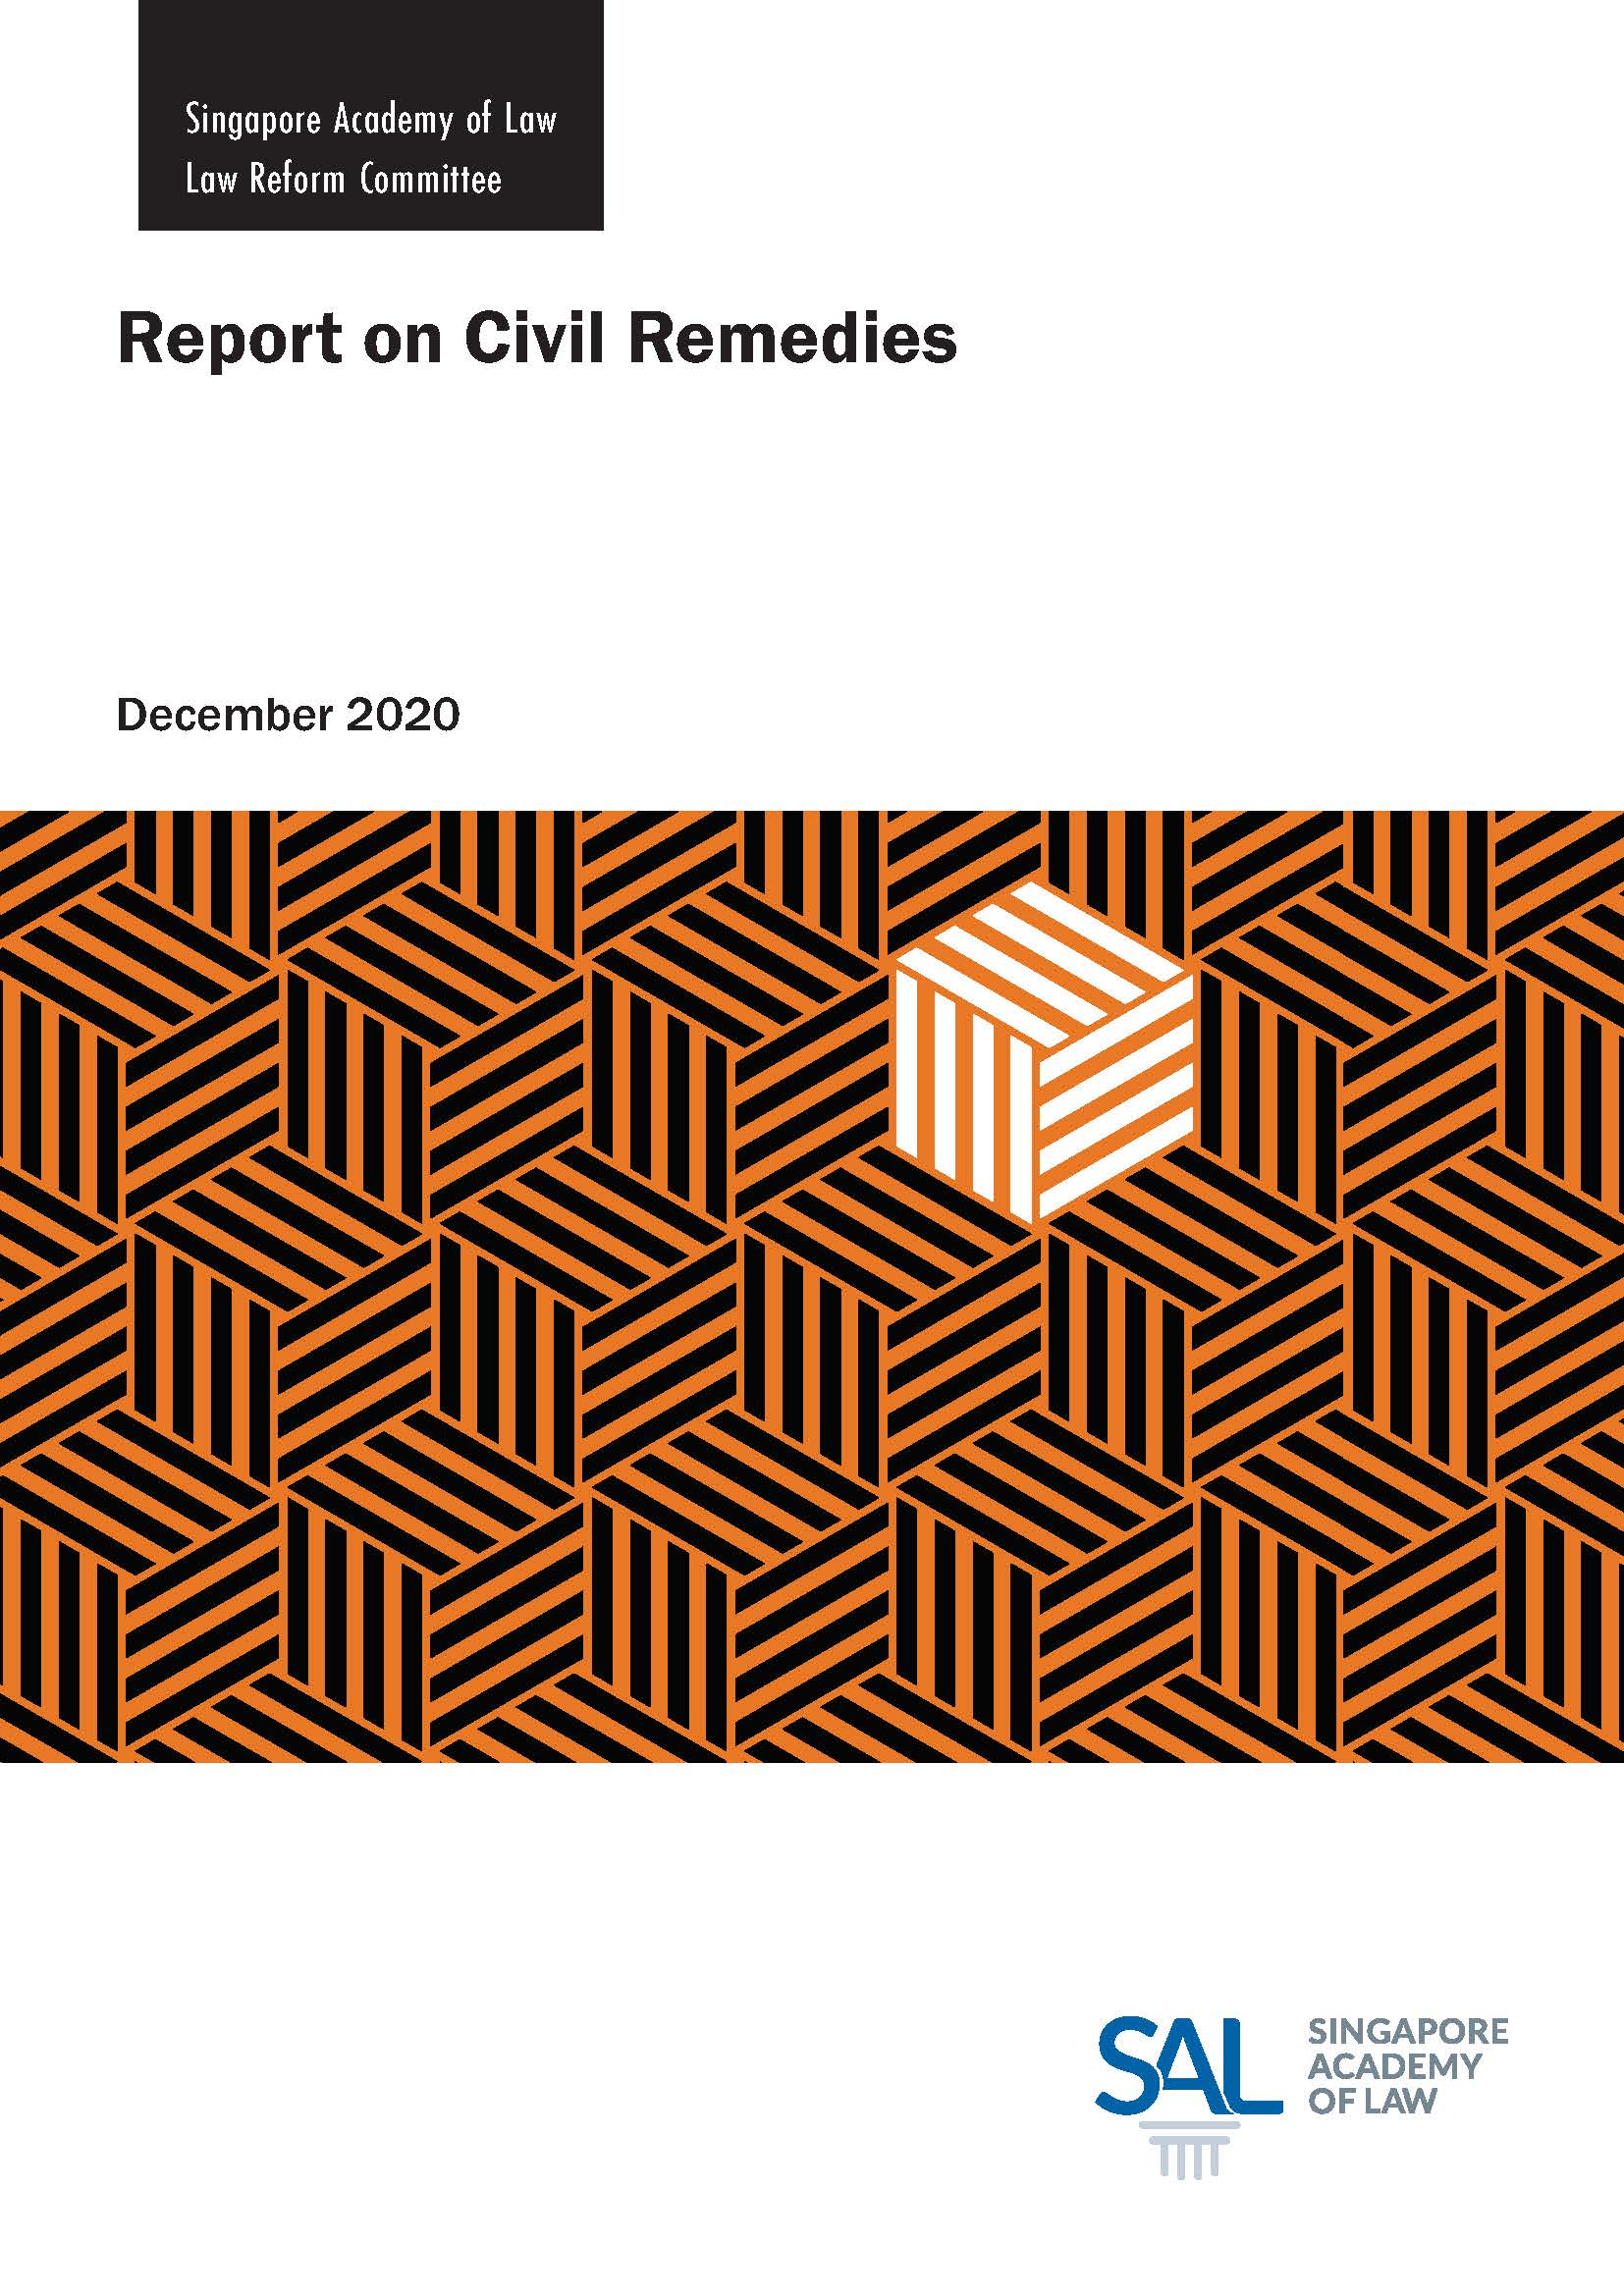 Report on Civil Remedies - Click to view Full Report